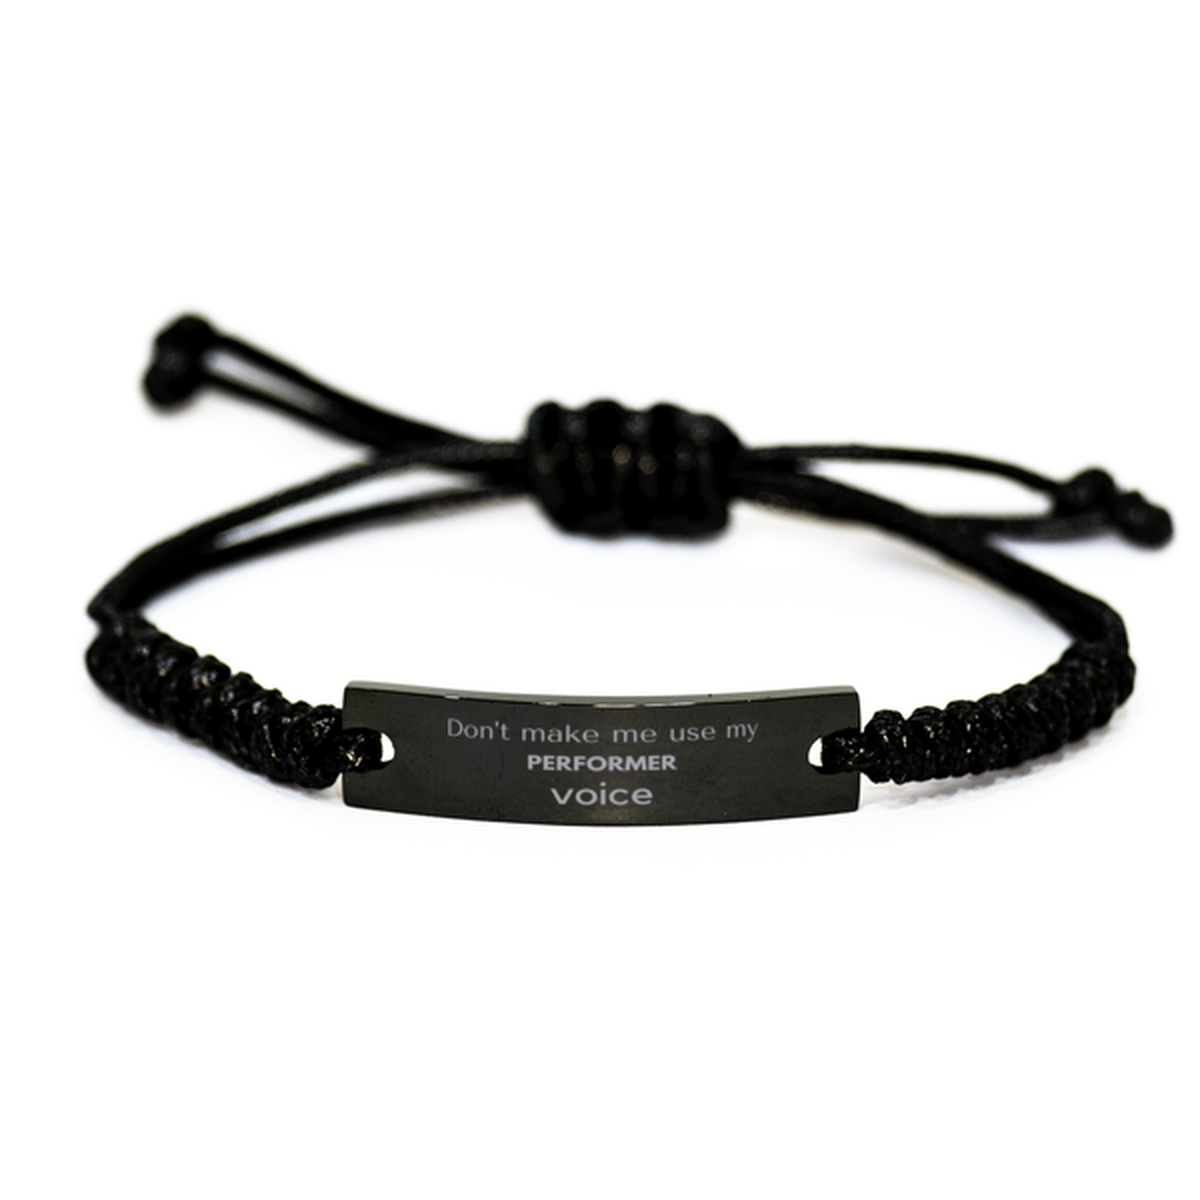 Don't make me use my Performer voice, Sarcasm Performer Gifts, Christmas Performer Black Rope Bracelet Birthday Unique Gifts For Performer Coworkers, Men, Women, Colleague, Friends